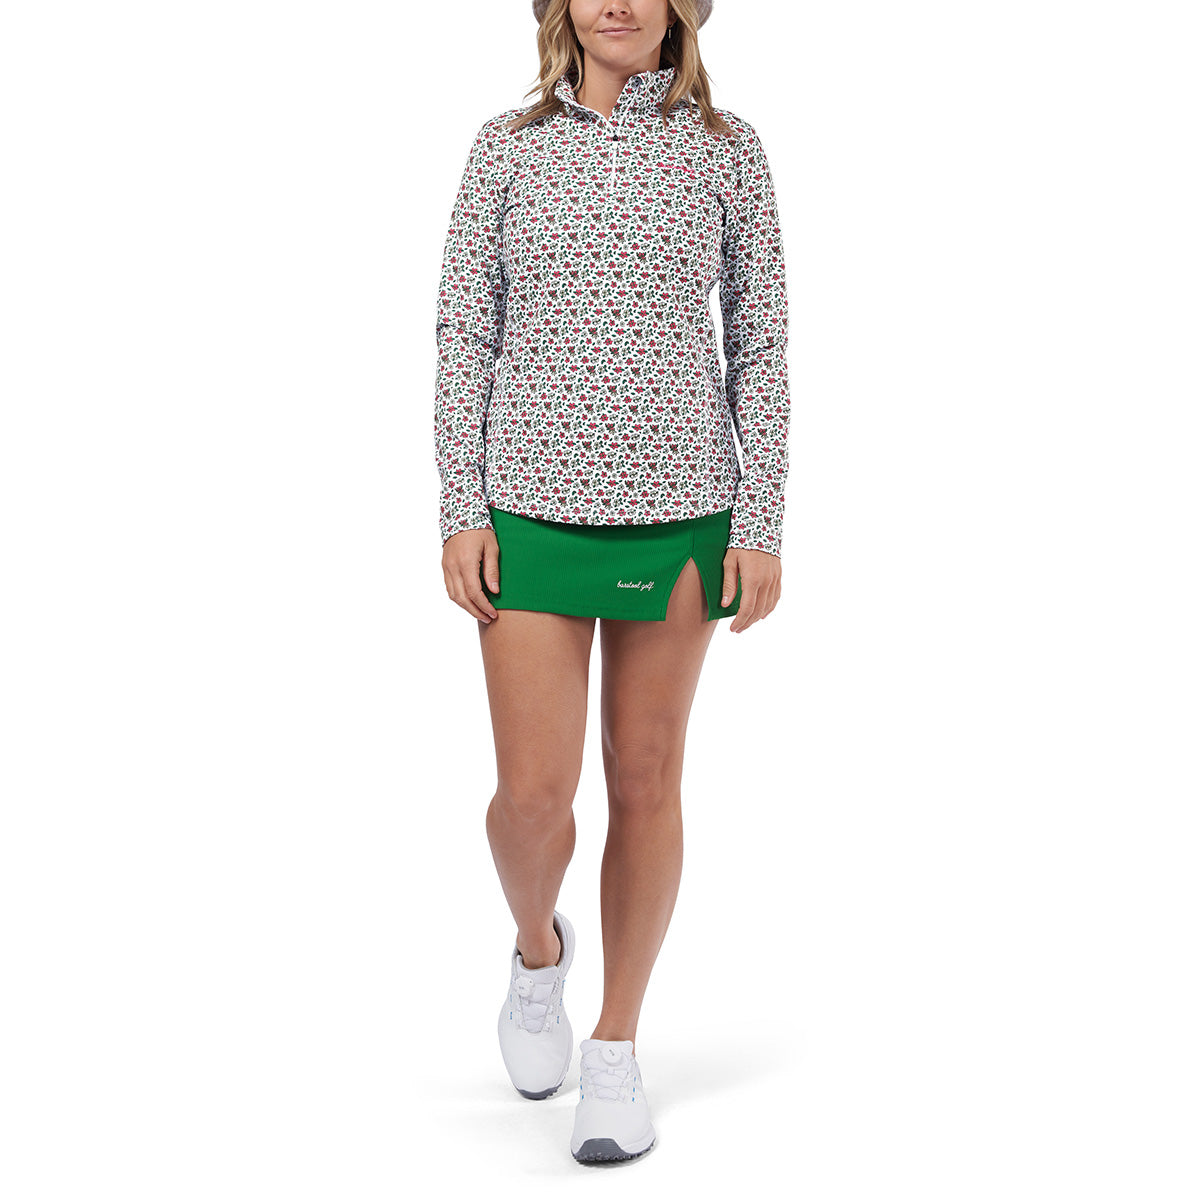 Barstool Golf Women's Floral Quarter Zip-Pullovers-Fore Play-Barstool Sports